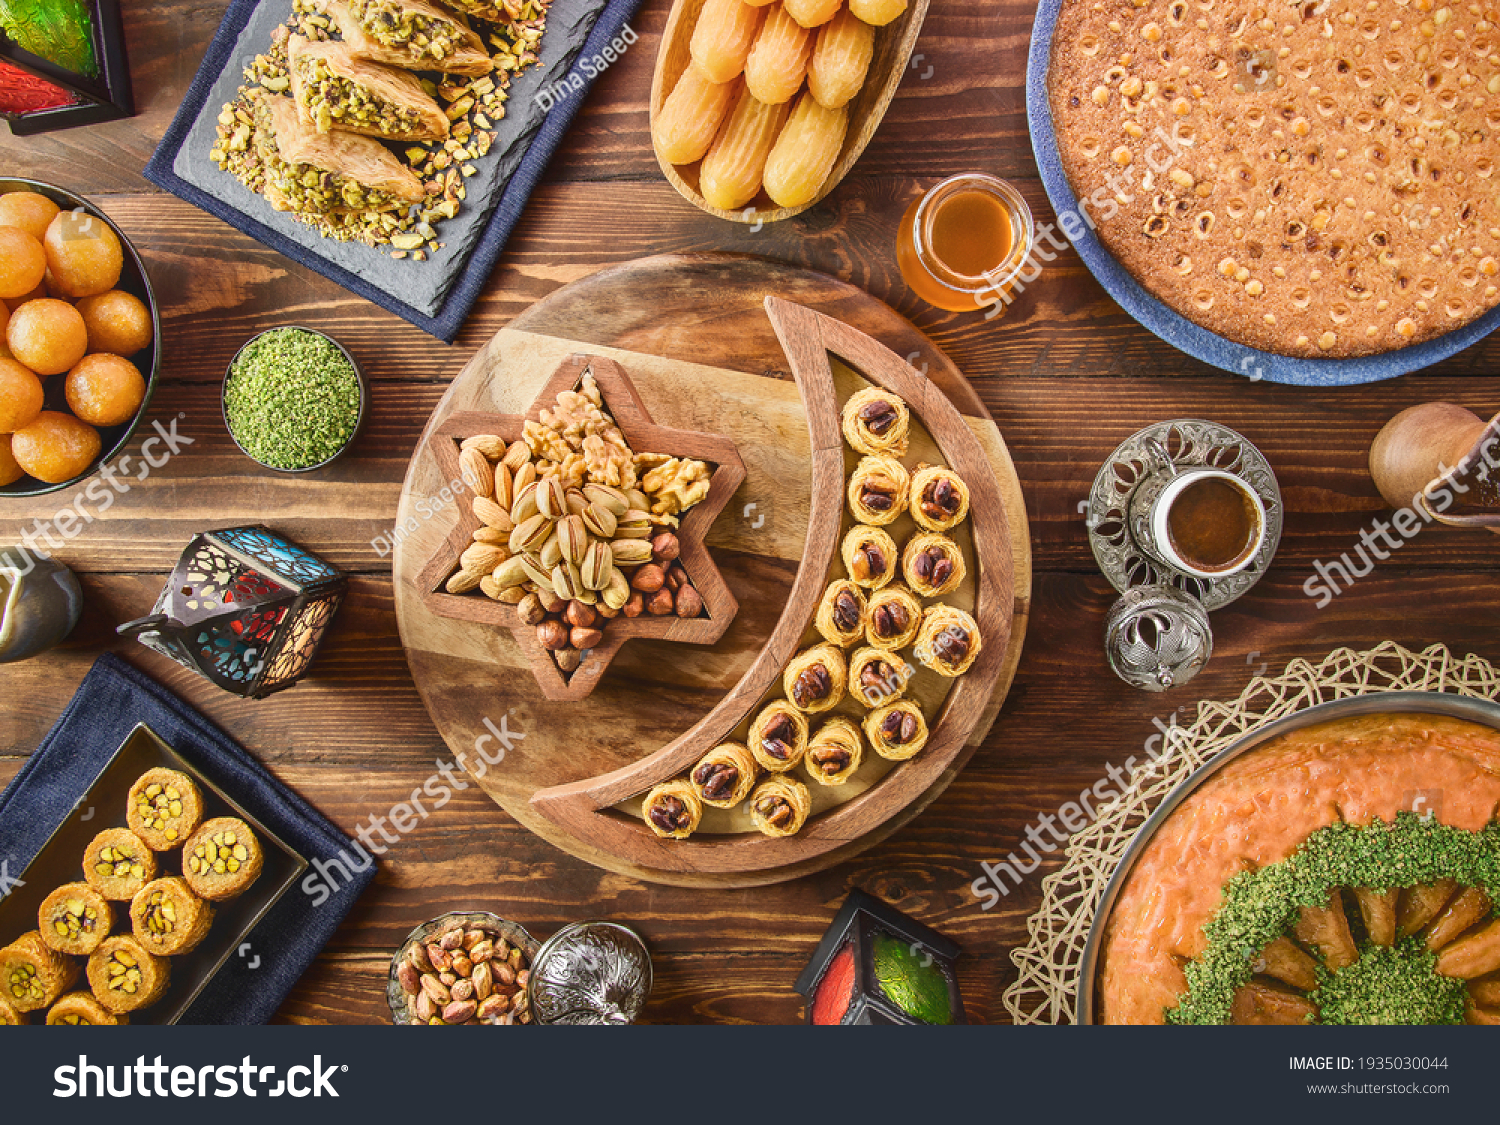 Arabic Cuisine: Middle Eastern desserts. Delicious collection of Ramadan traditional desserts. Served with tasty nuts, Arabic coffee, honey syrup and sugar syrup .Top view with close up. #1935030044